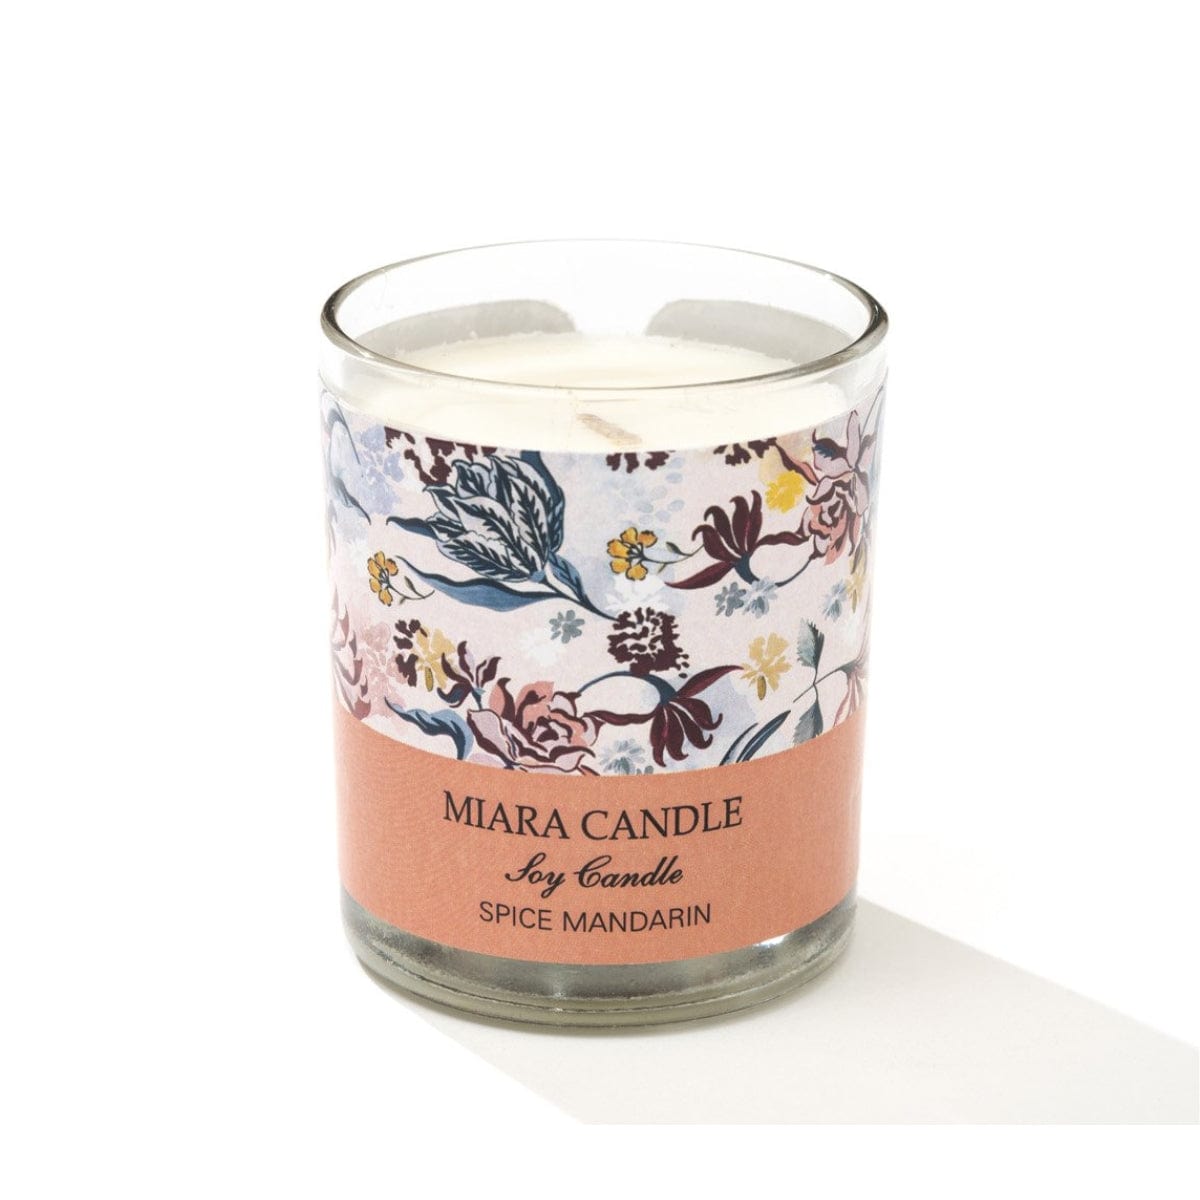 Gifts of Love Luxurious Soy Wax Miara Candle